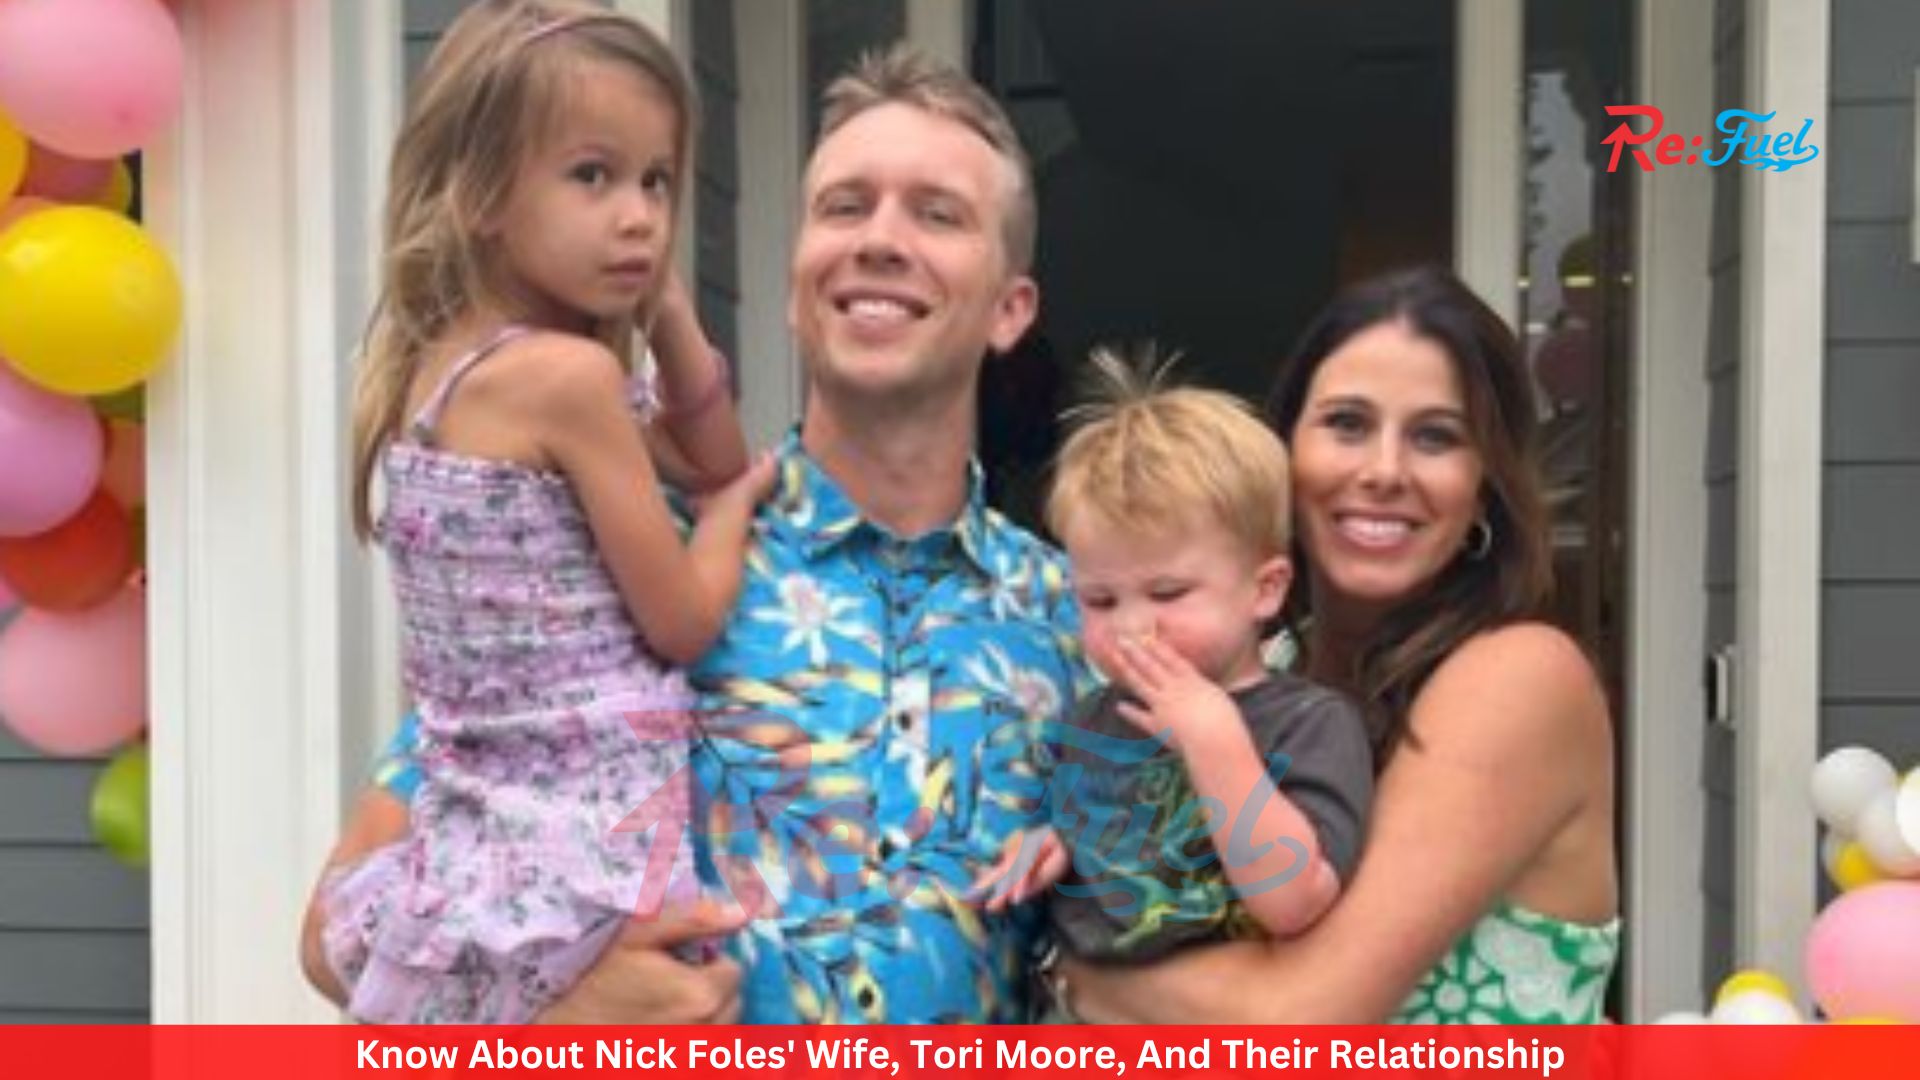 Know About Nick Foles' Wife, Tori Moore, And Their Relationship